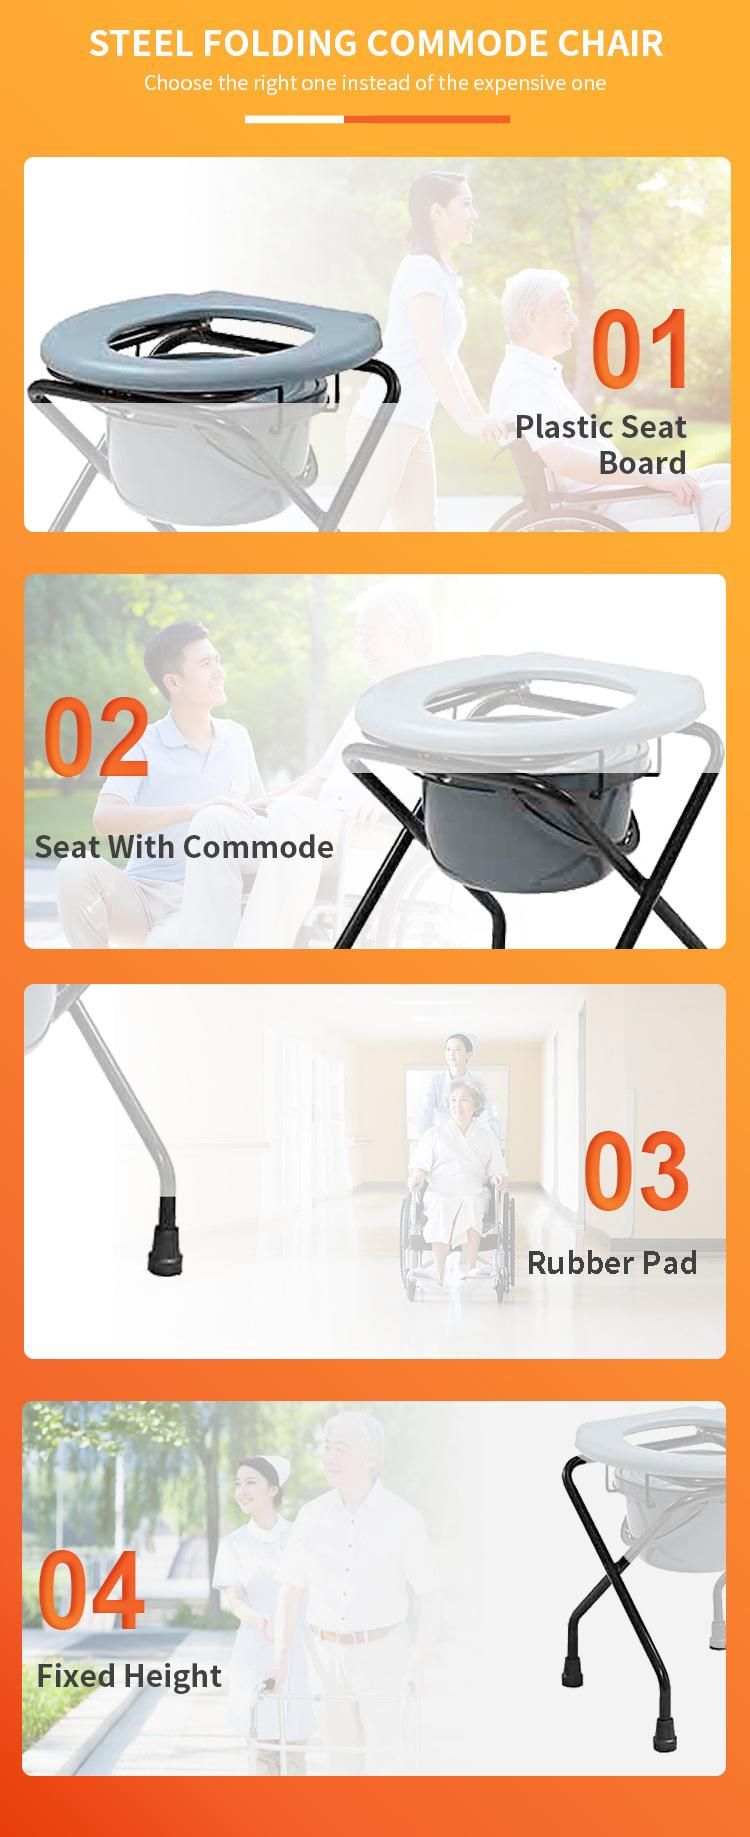 Installation Free Folding Easy Carry portable Steel Non-Slip Free Squate Commode Chair with Grey Color Seat Board with Commode for Elder and Pregnant Woman